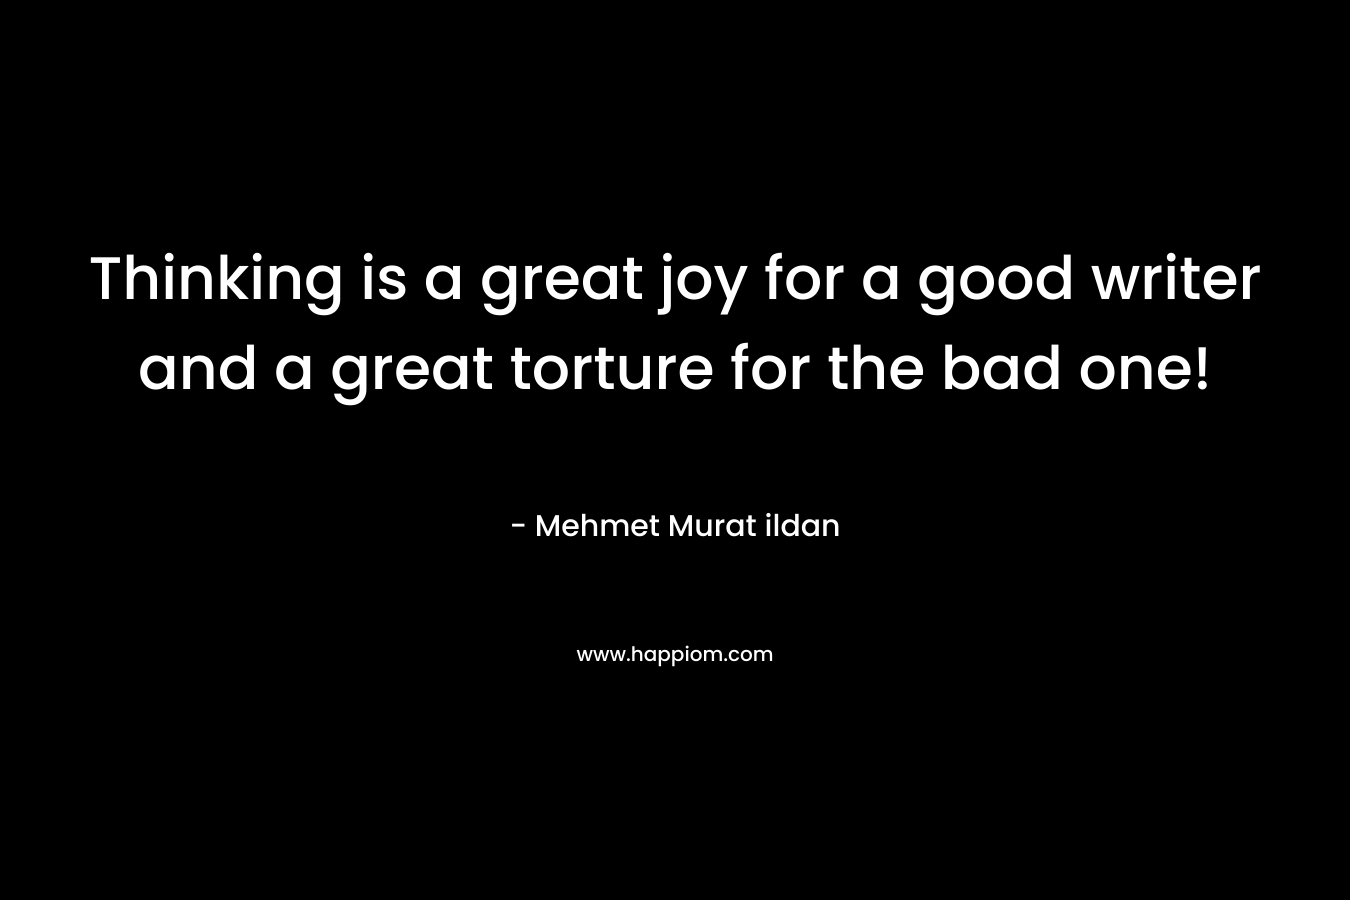 Thinking is a great joy for a good writer and a great torture for the bad one! – Mehmet Murat ildan